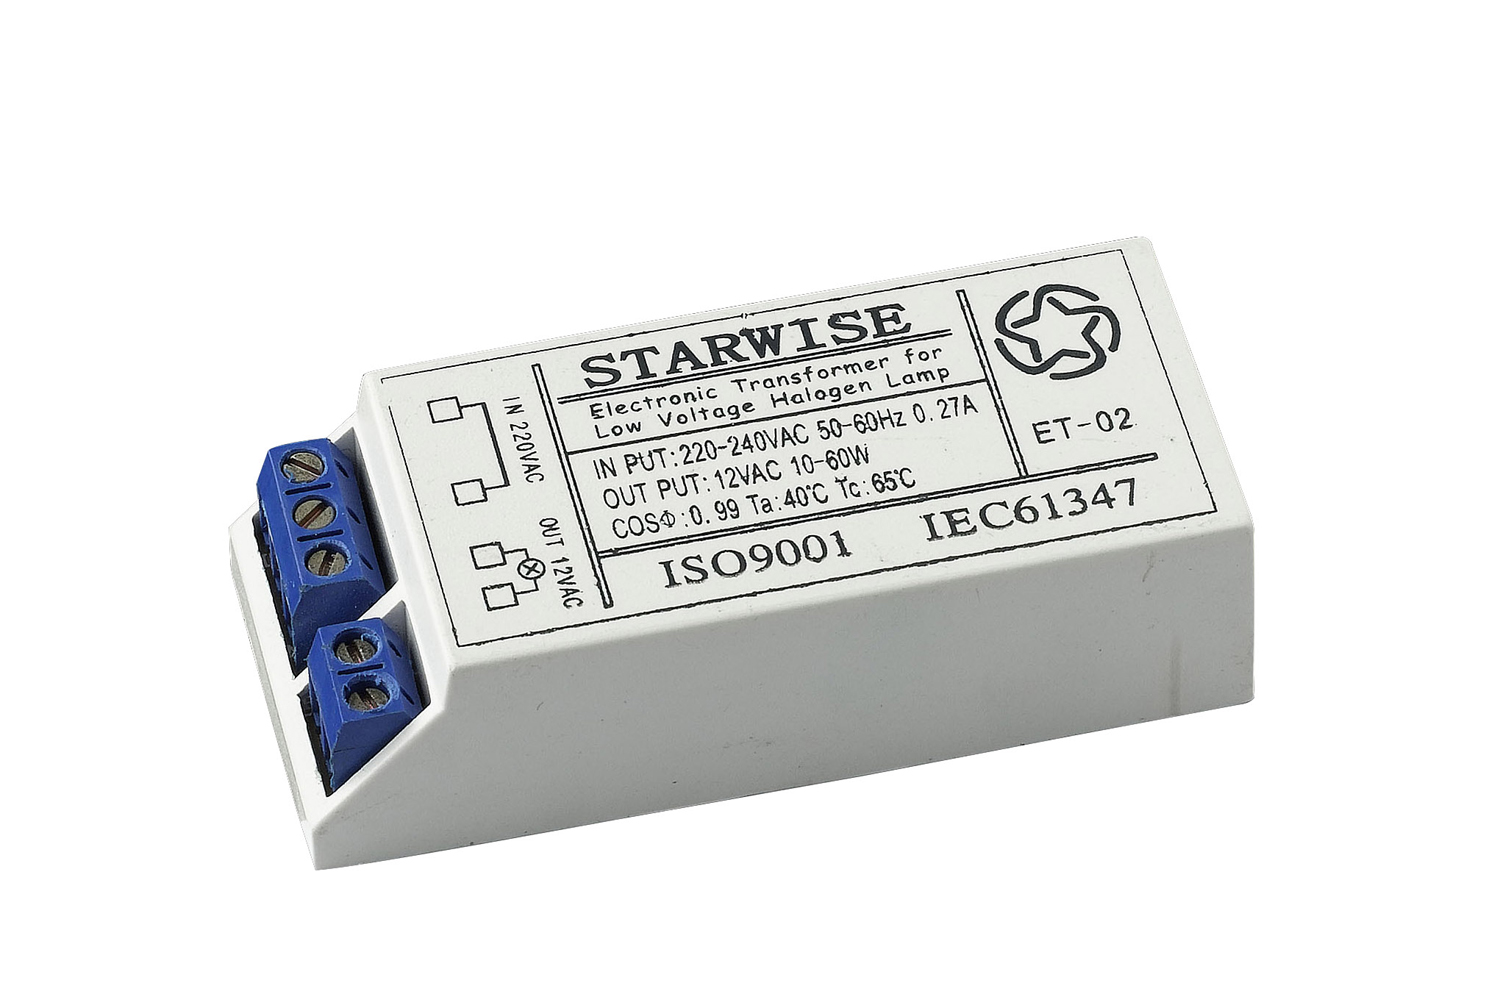 ET-P01 Ballast with Input Voltage of 220 to 240V, Suitable for Halogen Lamps